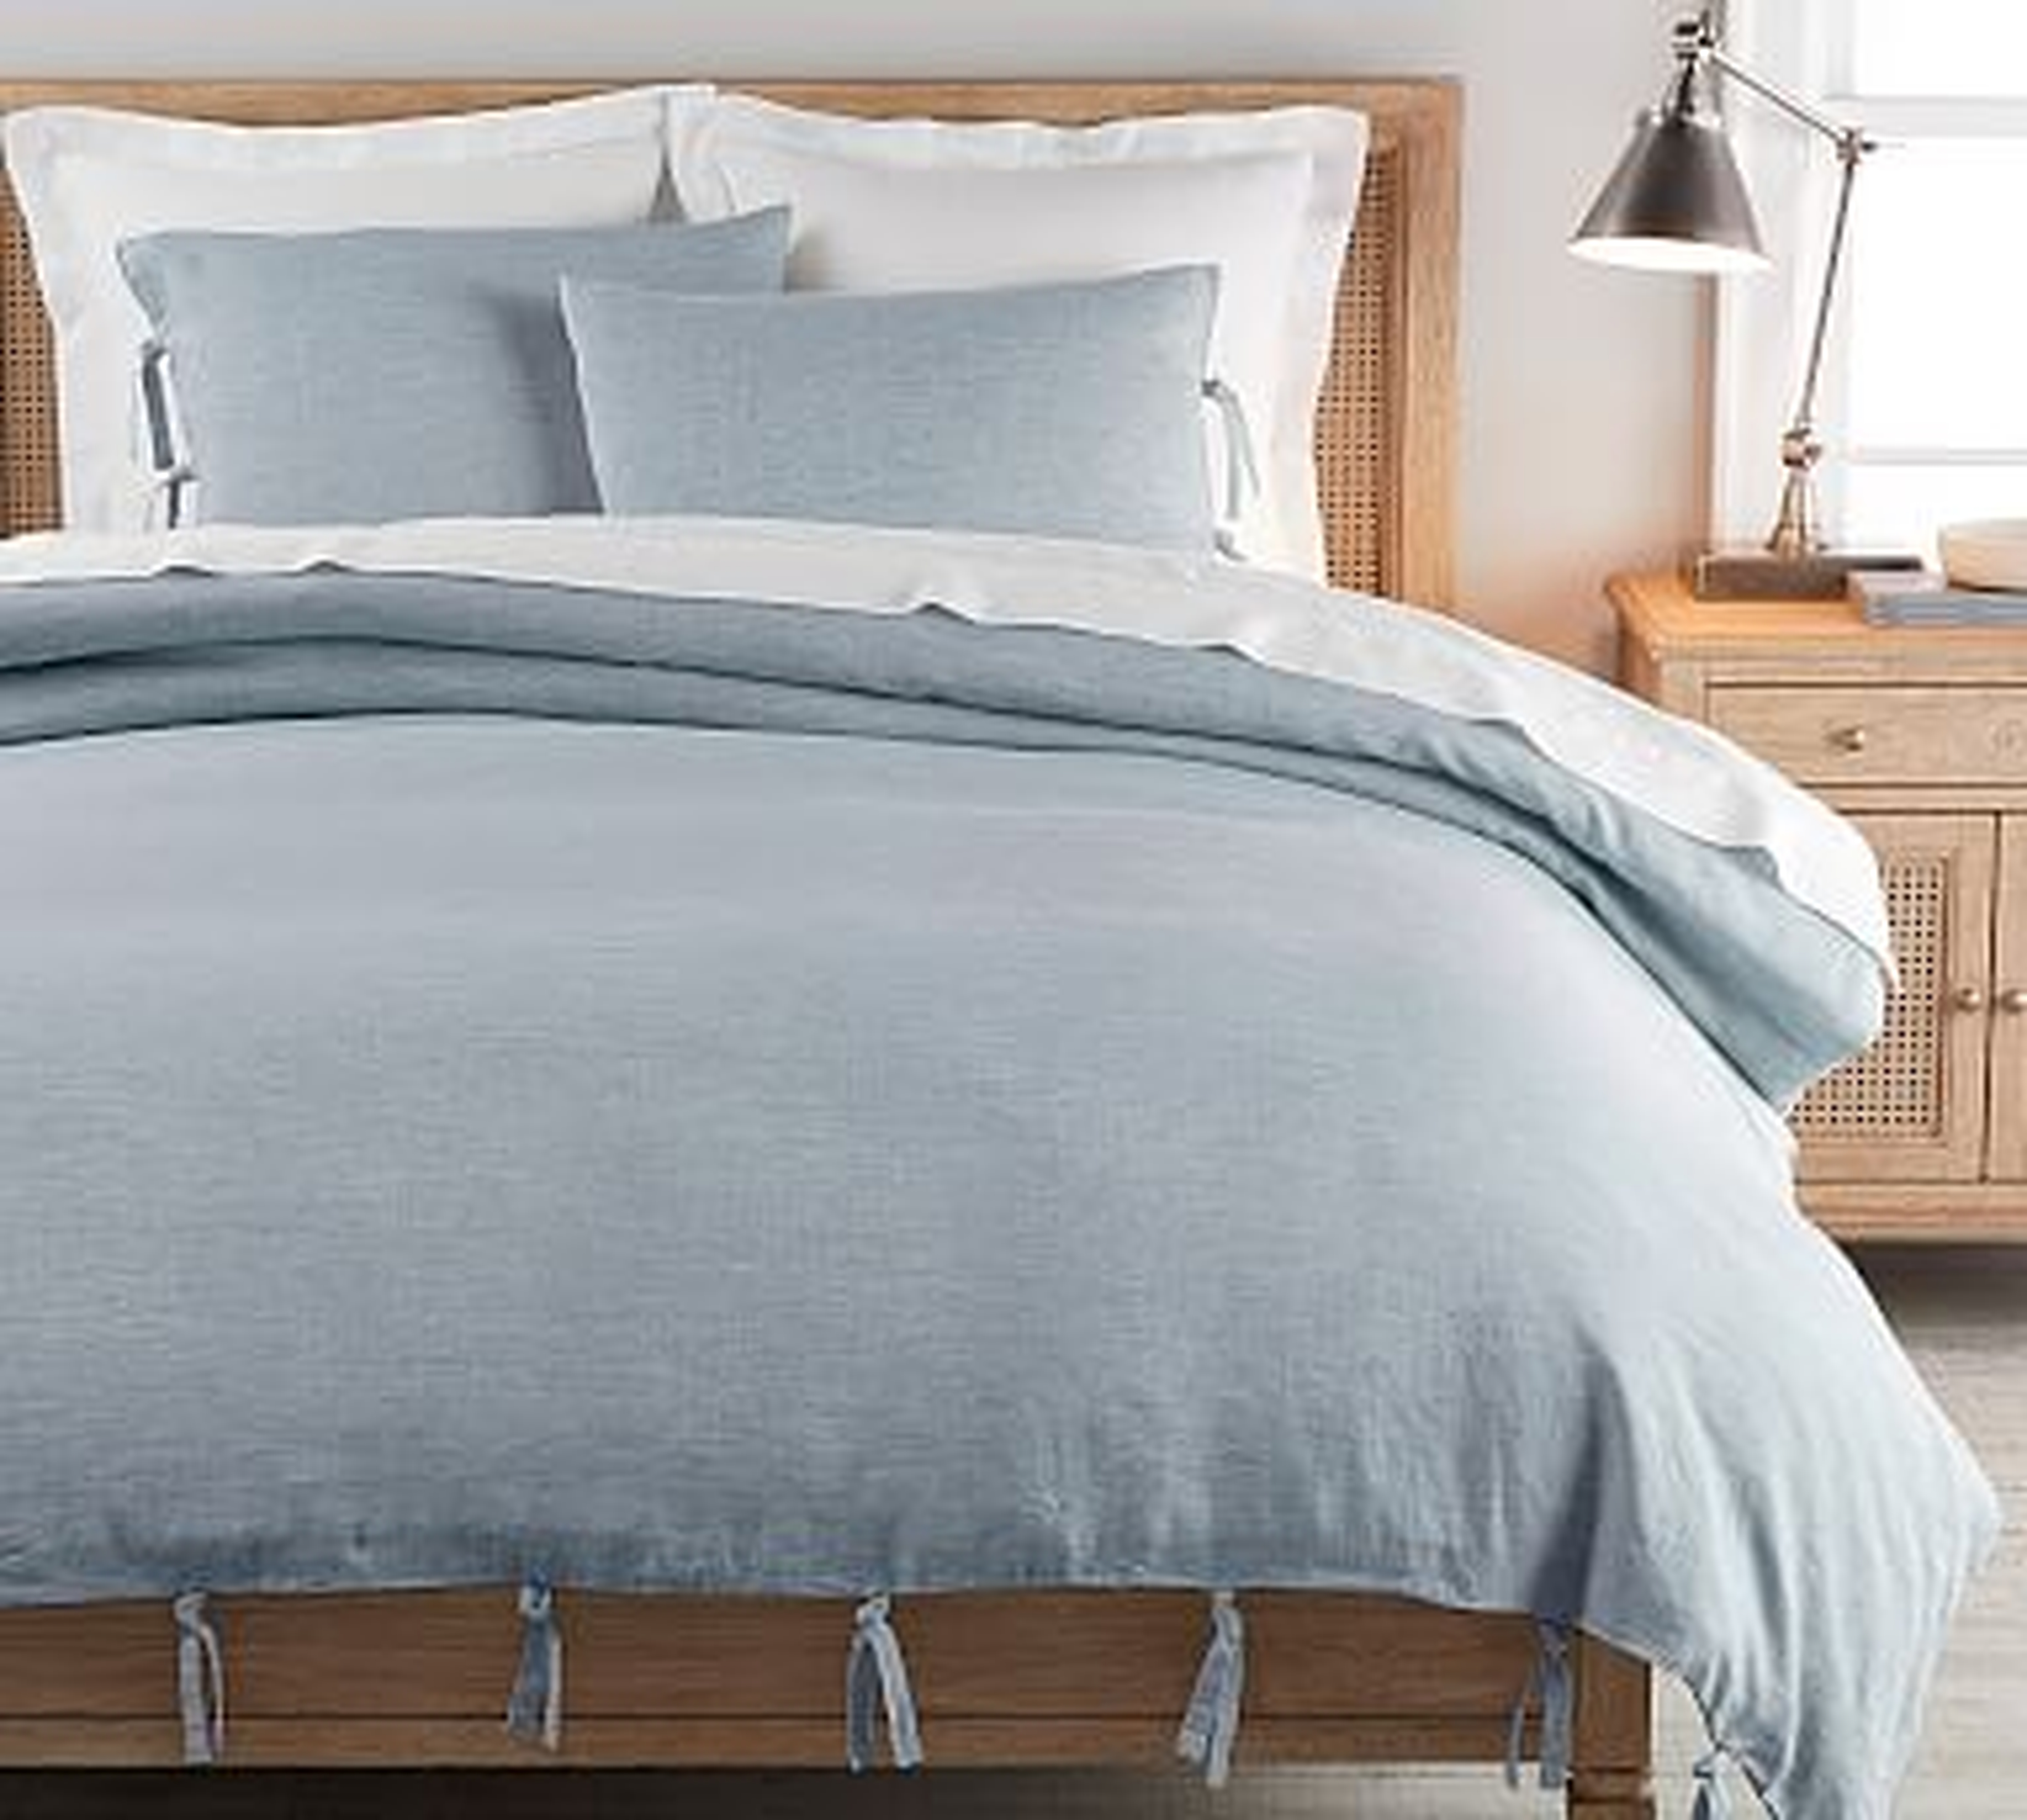 Belgian Linen with Ties Duvet Cover, King/Cal King, Chambray/Flax - Pottery Barn